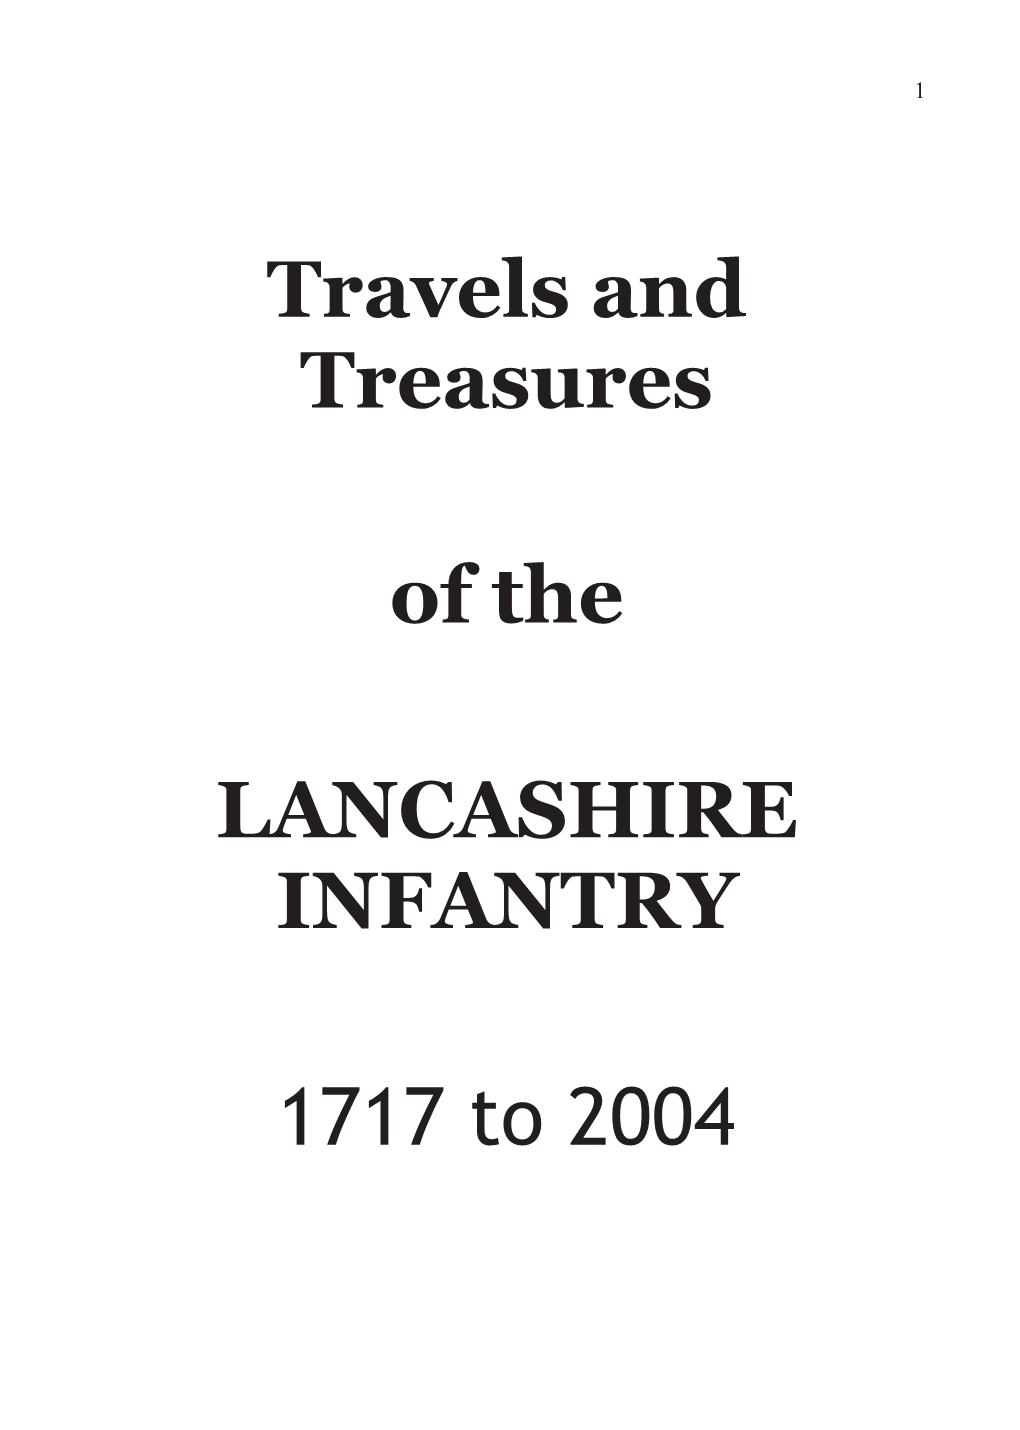 Travels & Treasures of the Lancashire Infantry